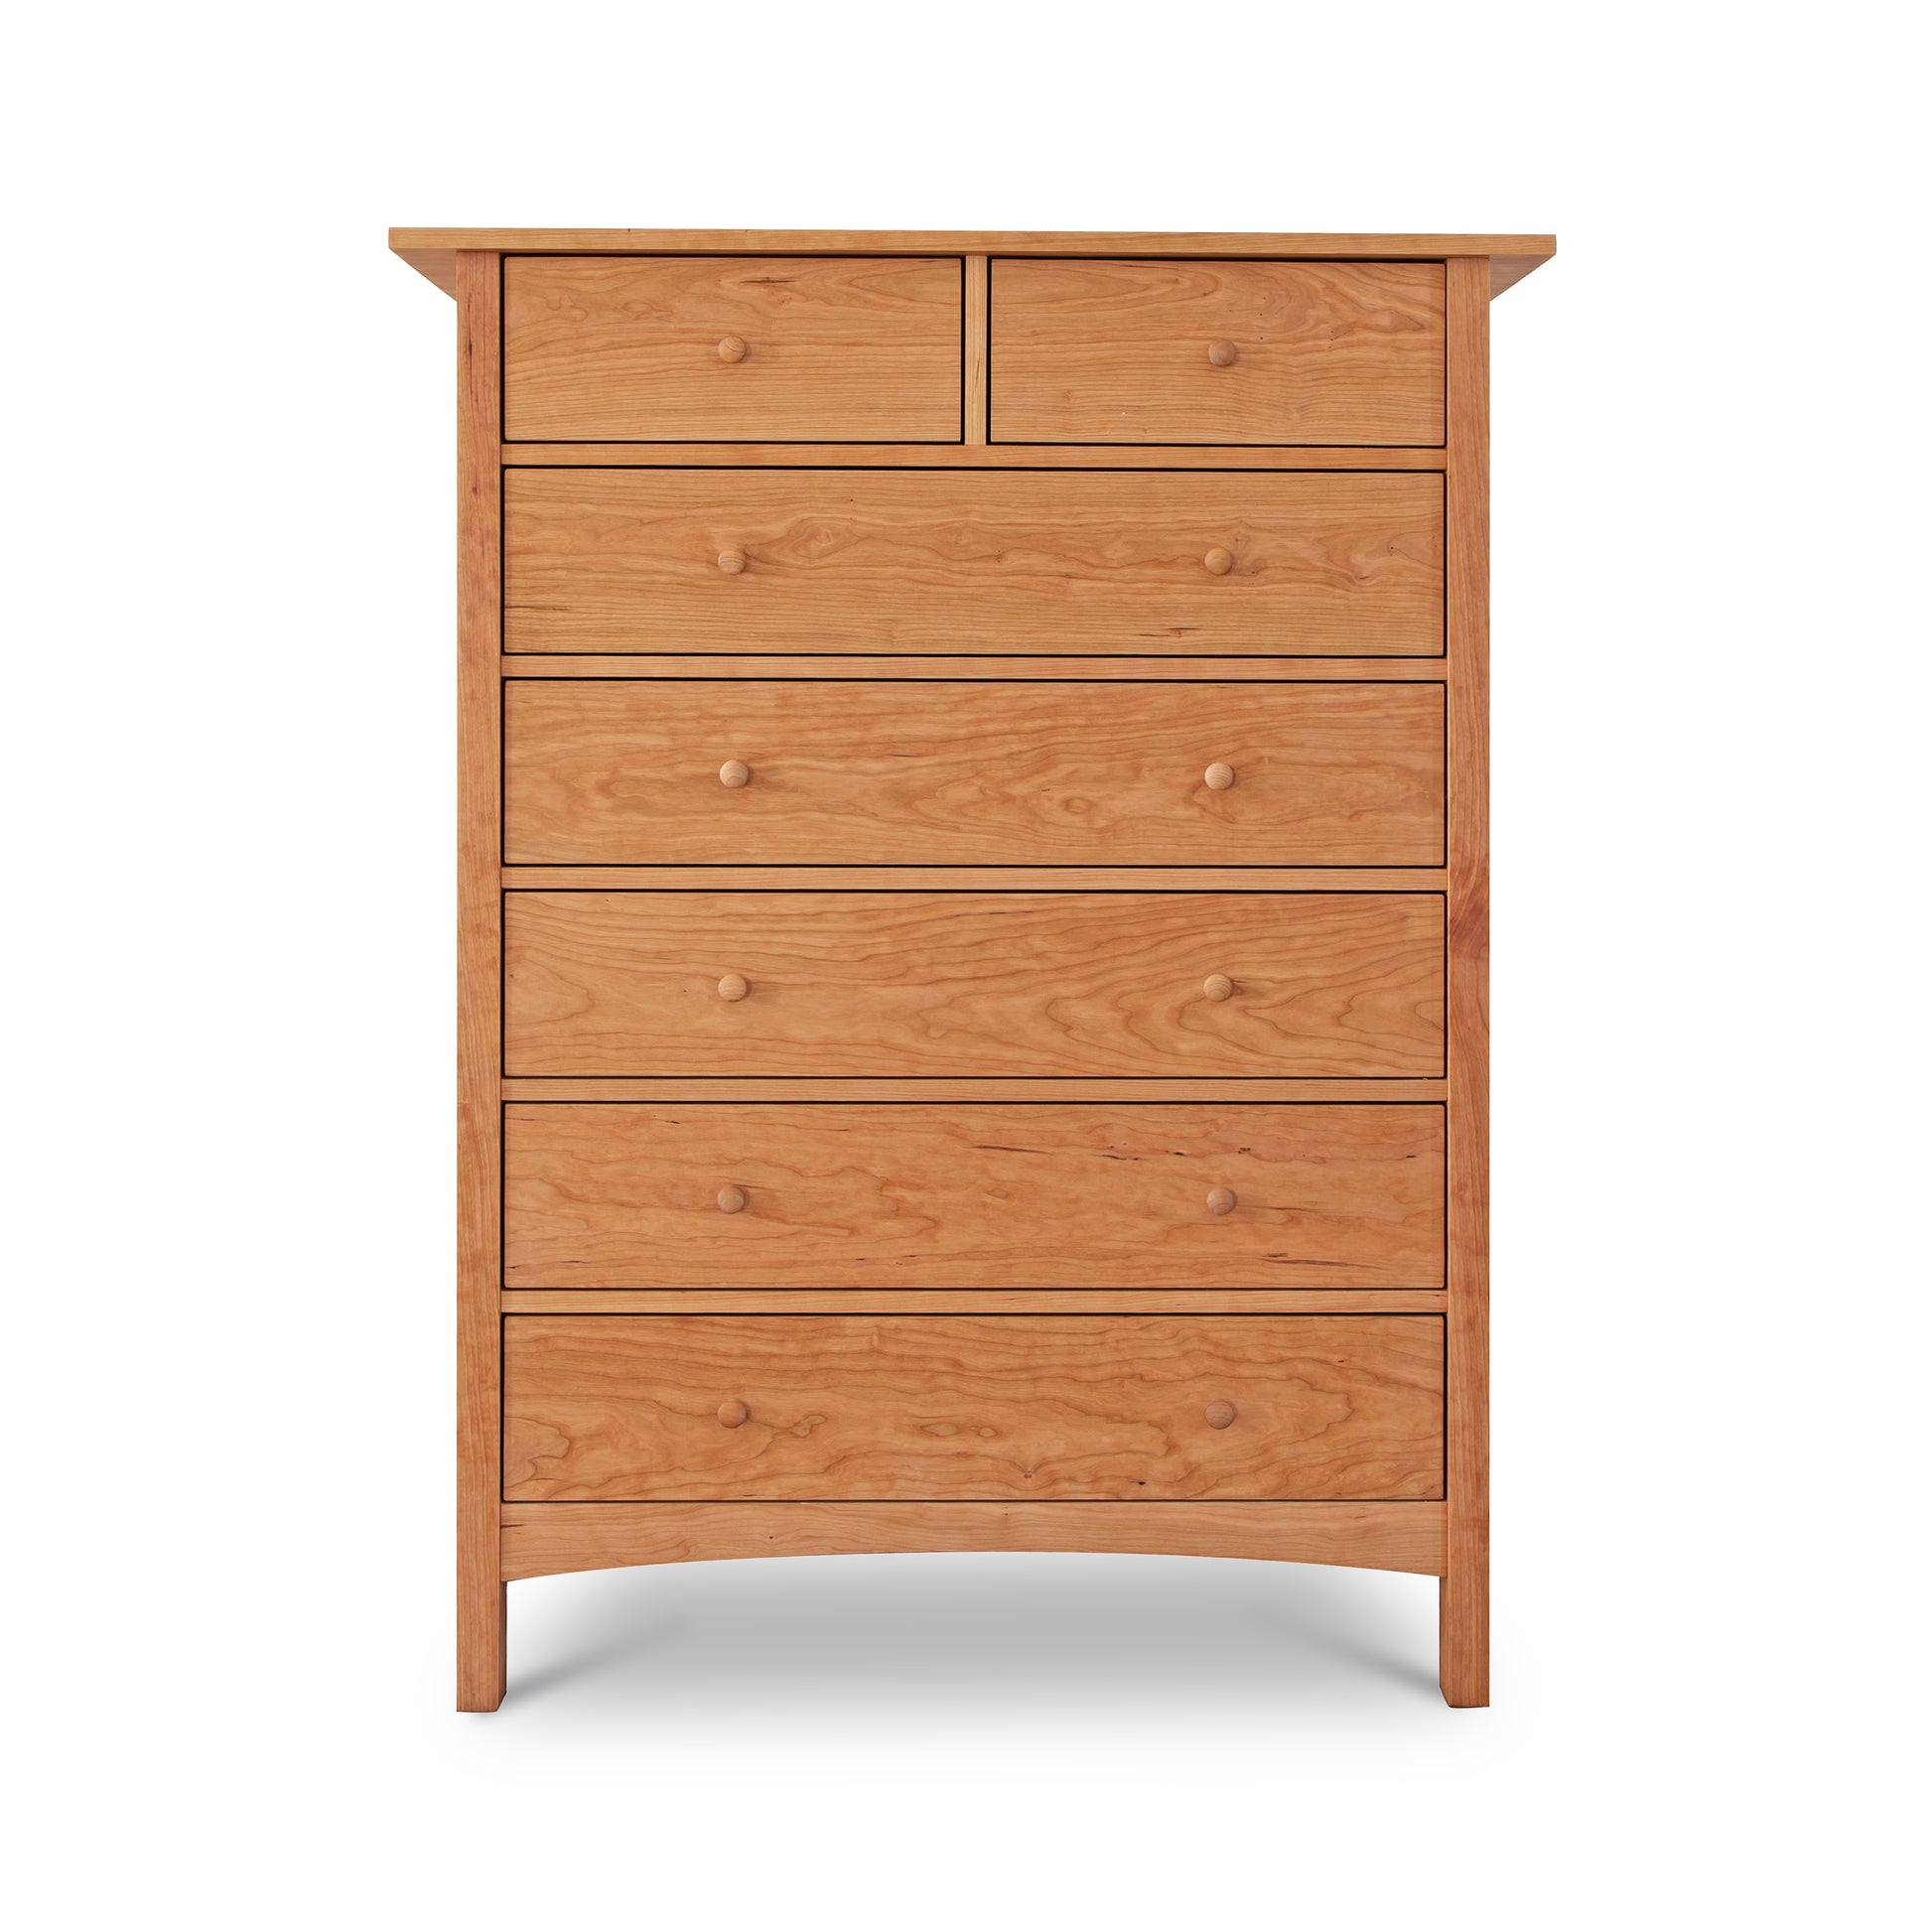 A solid wood Vermont Furniture Designs Burlington Shaker 7-Drawer Chest with round knobs, isolated on a white background.